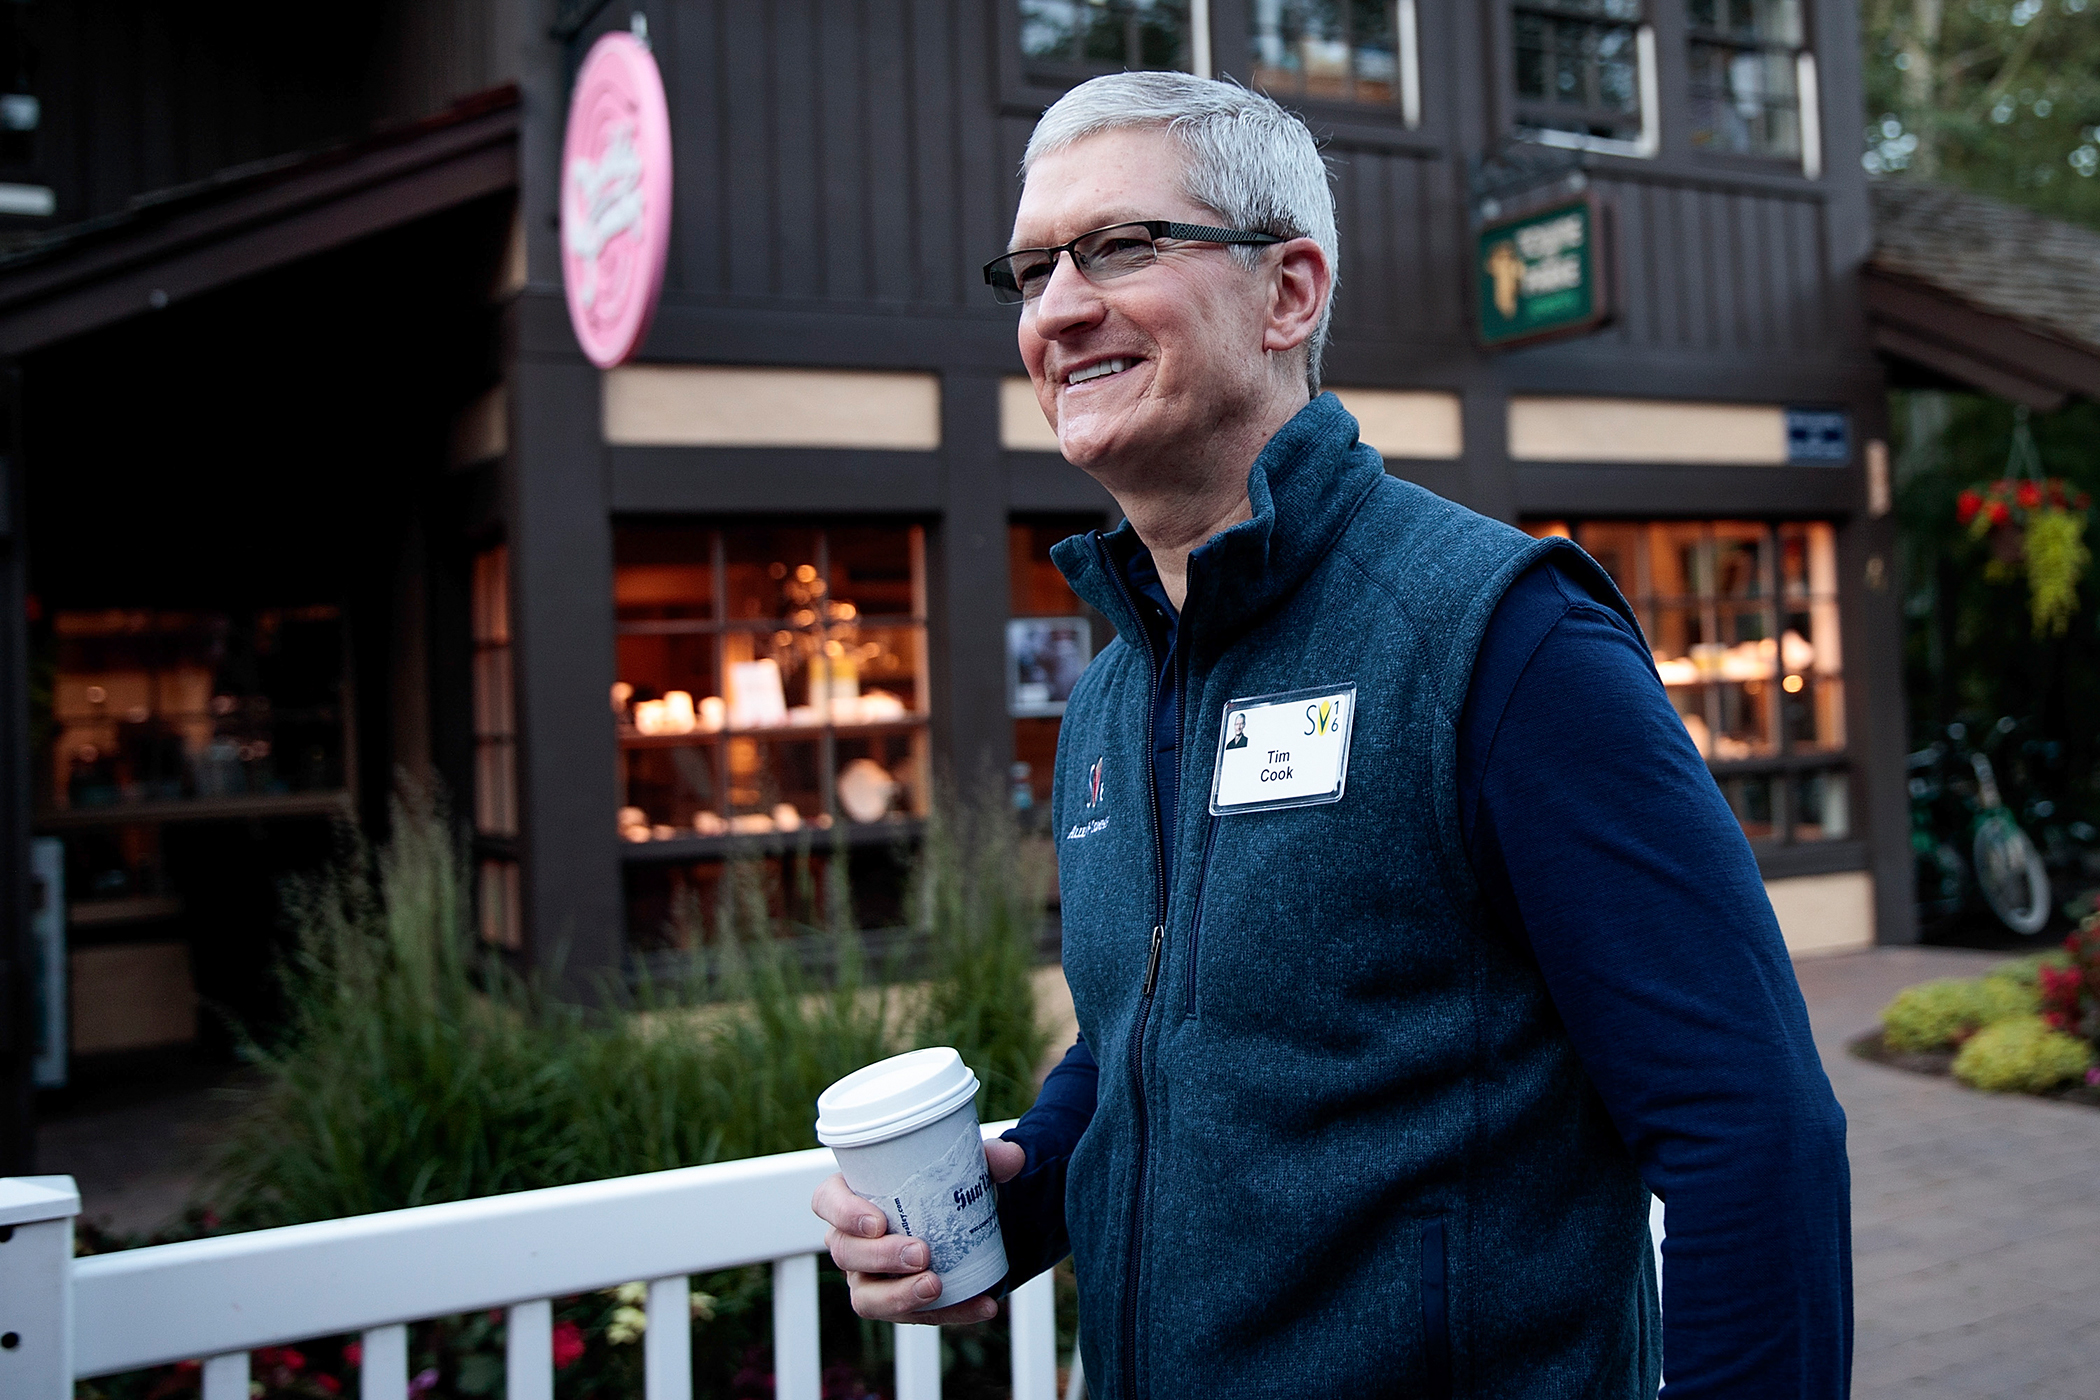 Tim Cook, chief executive officer of Apple Inc., attends the annual Allen &amp; Company Sun Valley Conference, July 6, 2016 in Sun Valley, Idaho. Every July, some of the world's most wealthy and powerful businesspeople from the media, finance, technology and political spheres converge at the Sun Valley Resort for the exclusive weeklong conference.